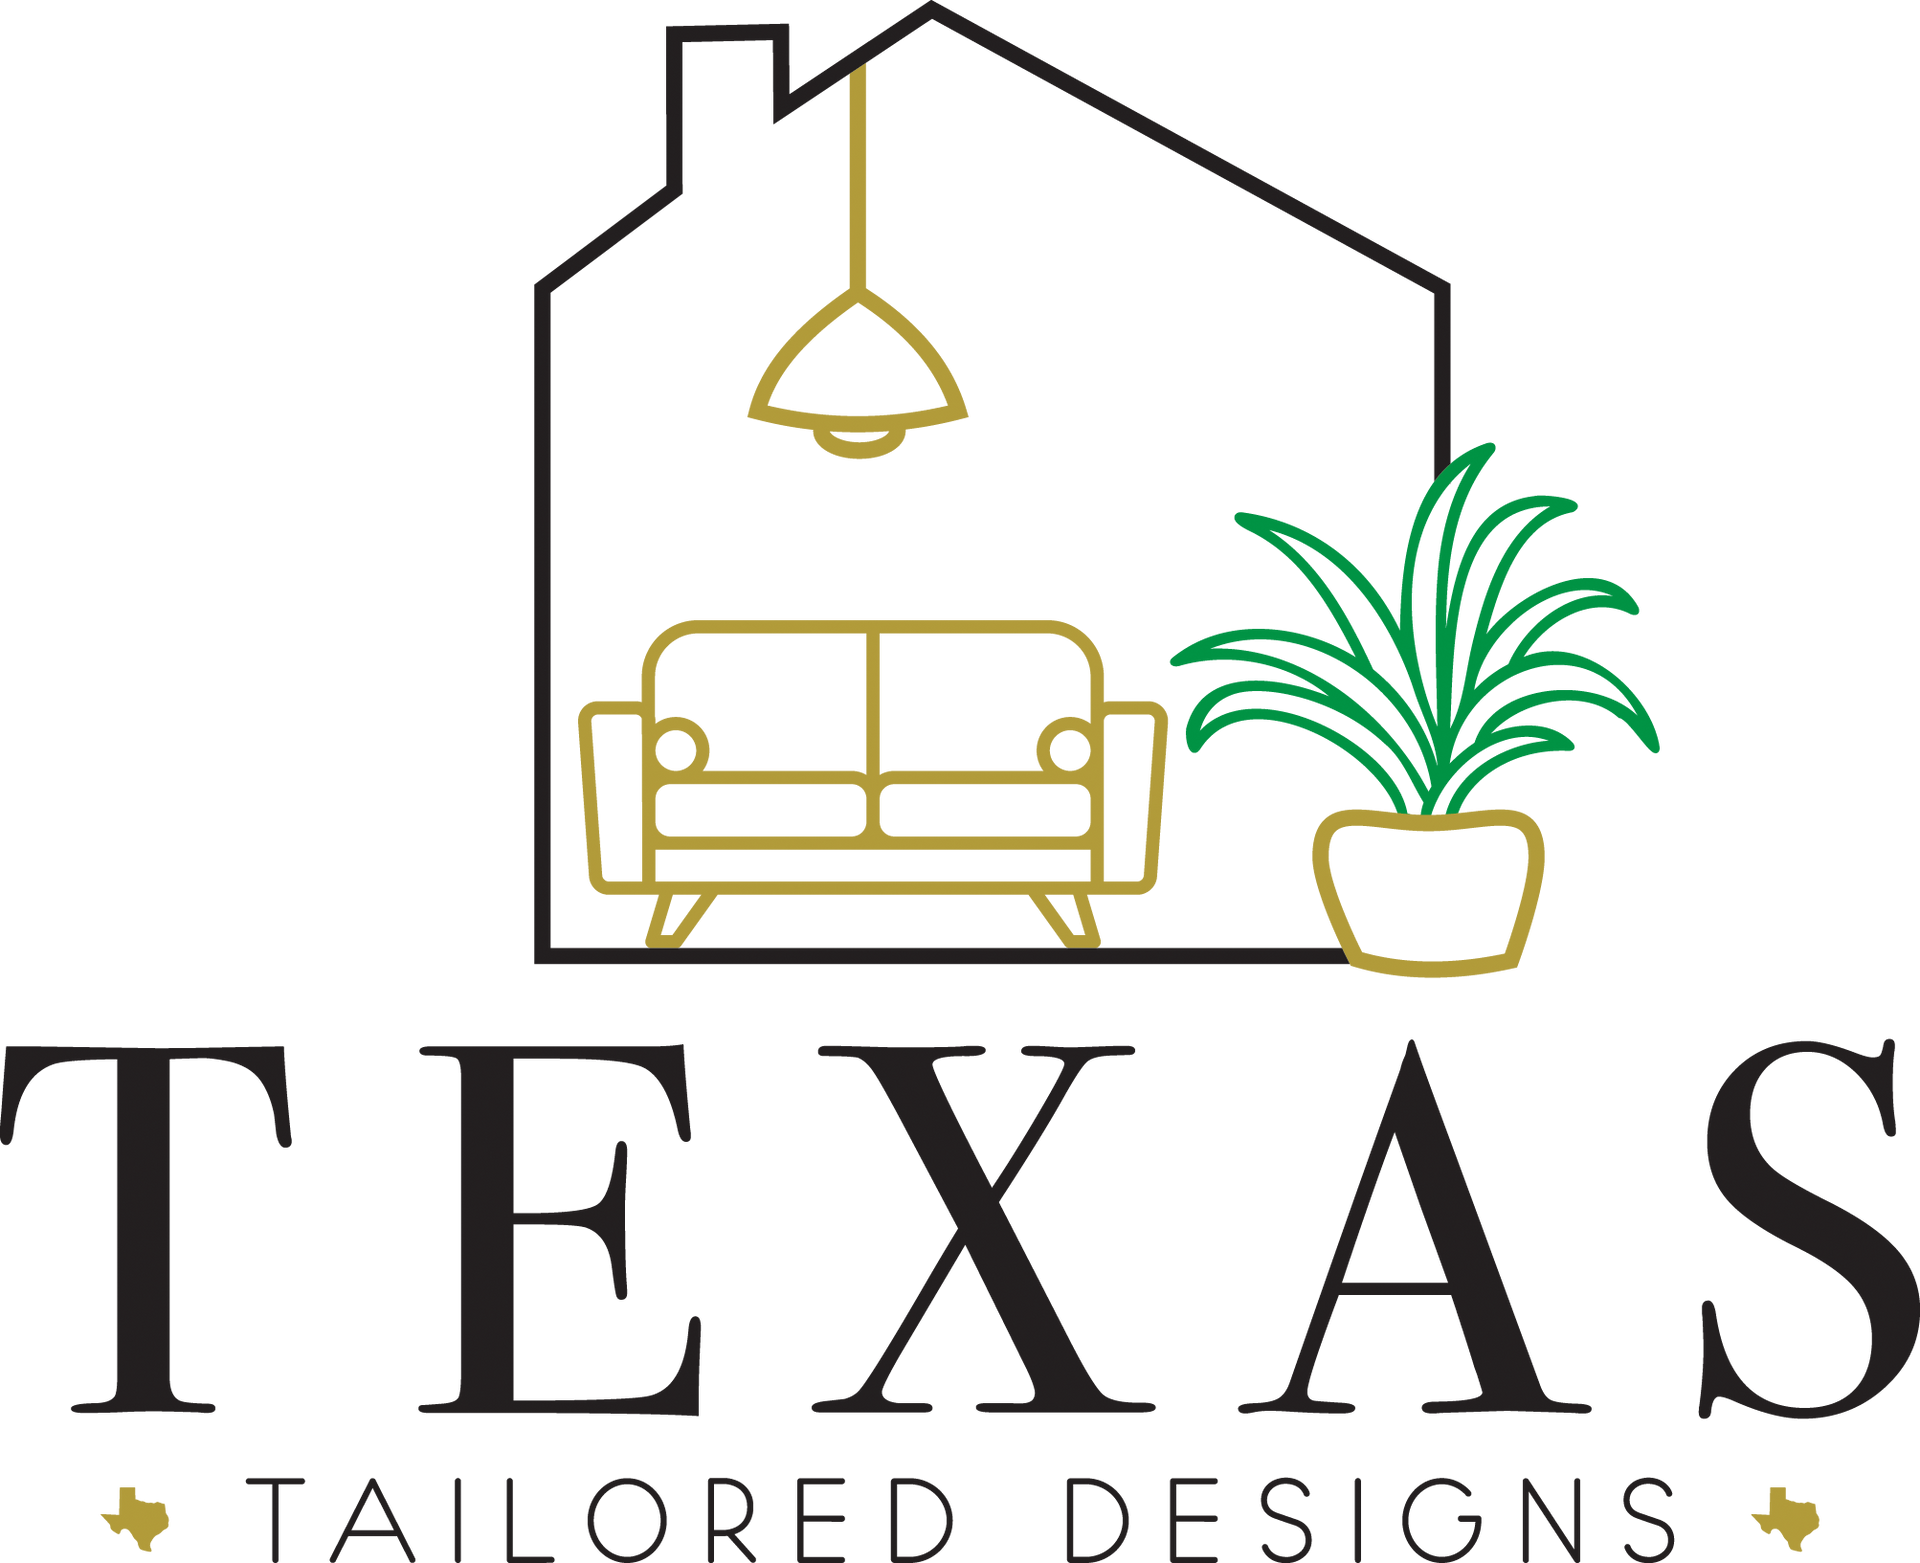 The logo for texas tailored designs shows a couch and a plant in a house.